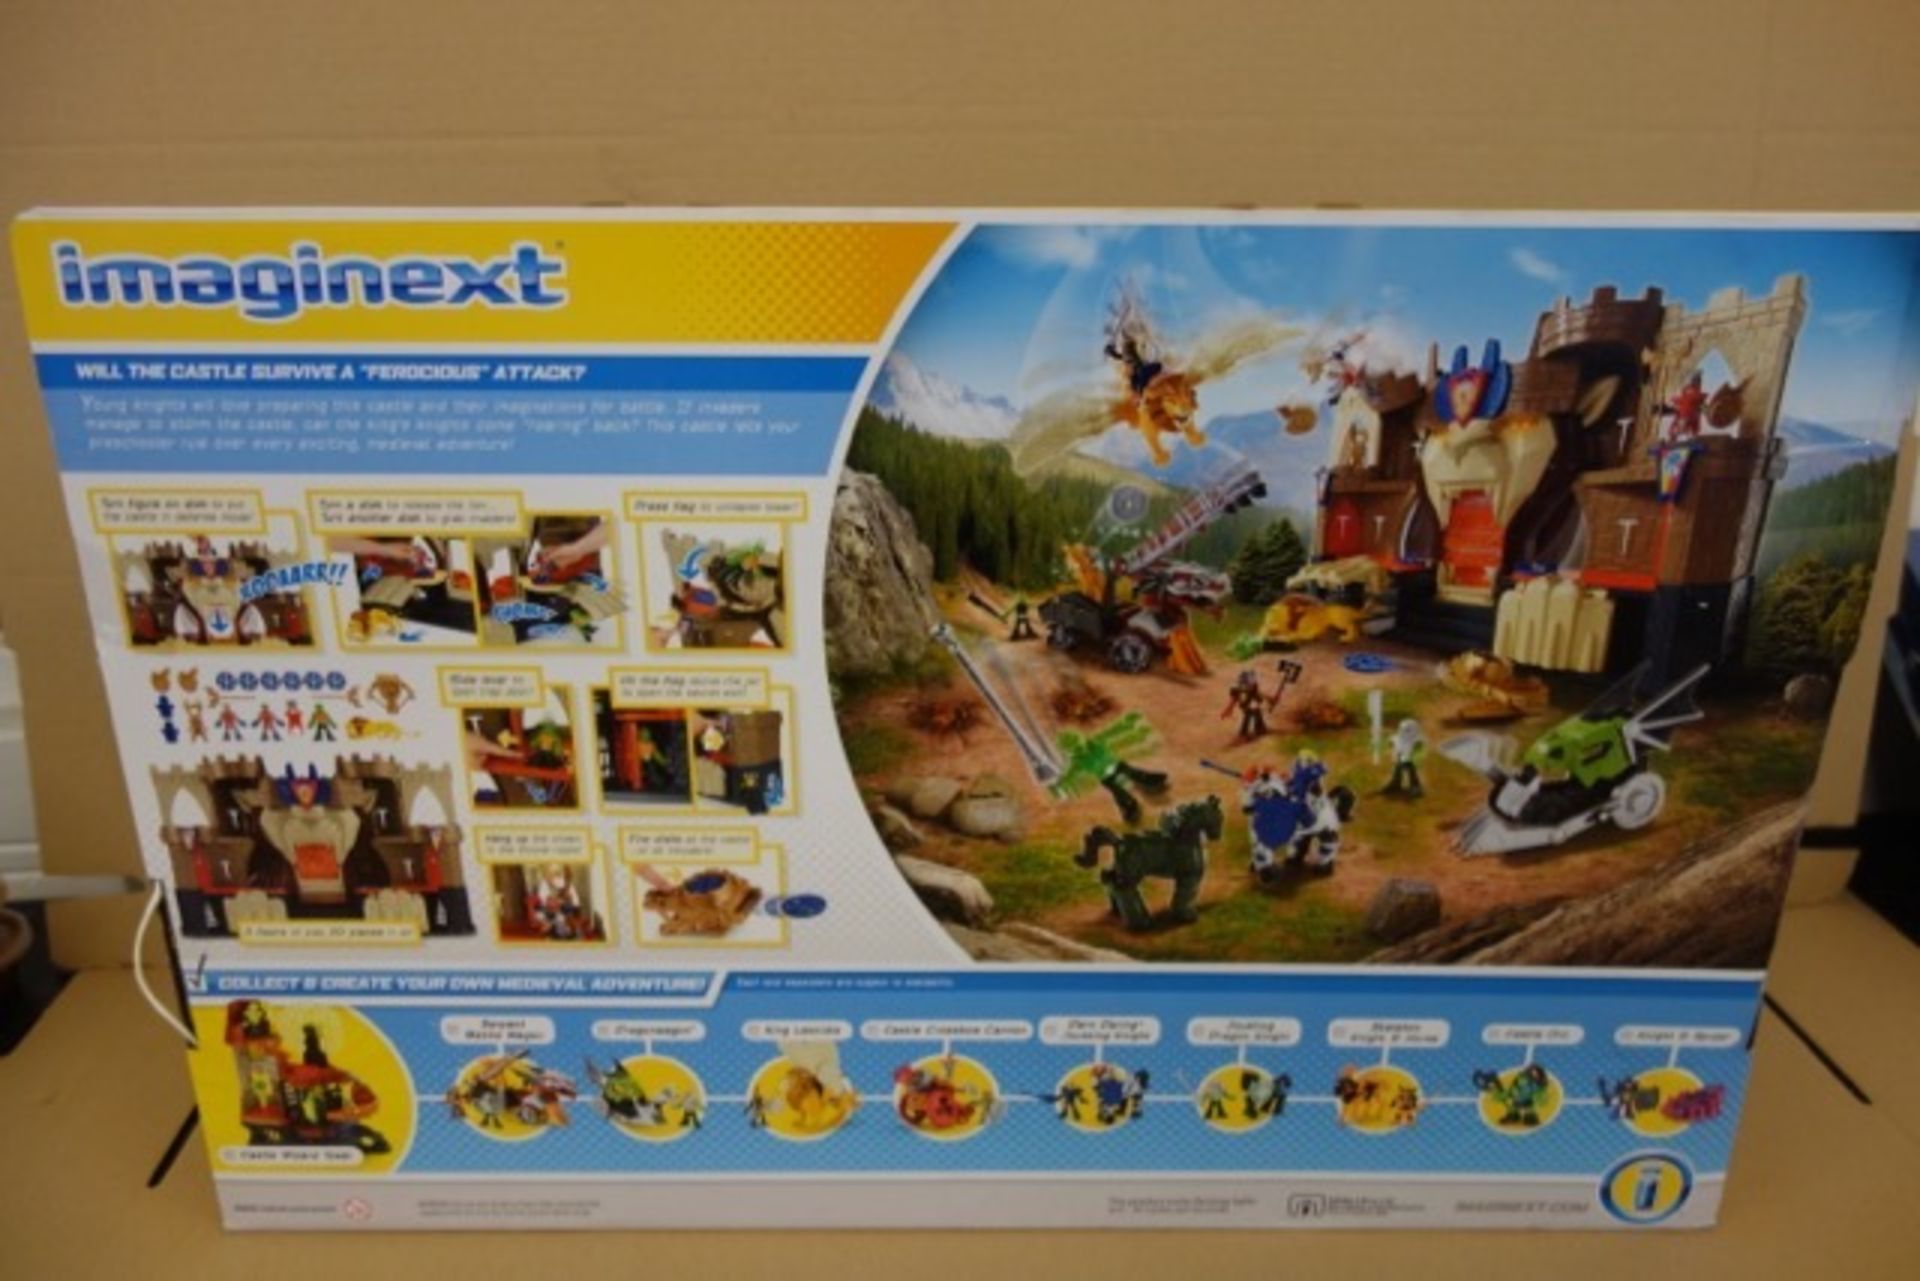 Pallet to contain 40 x Brand New Fisher Price Imaginext Large Lion's Den Castle Play Set. RRP £59 ea - Image 2 of 3